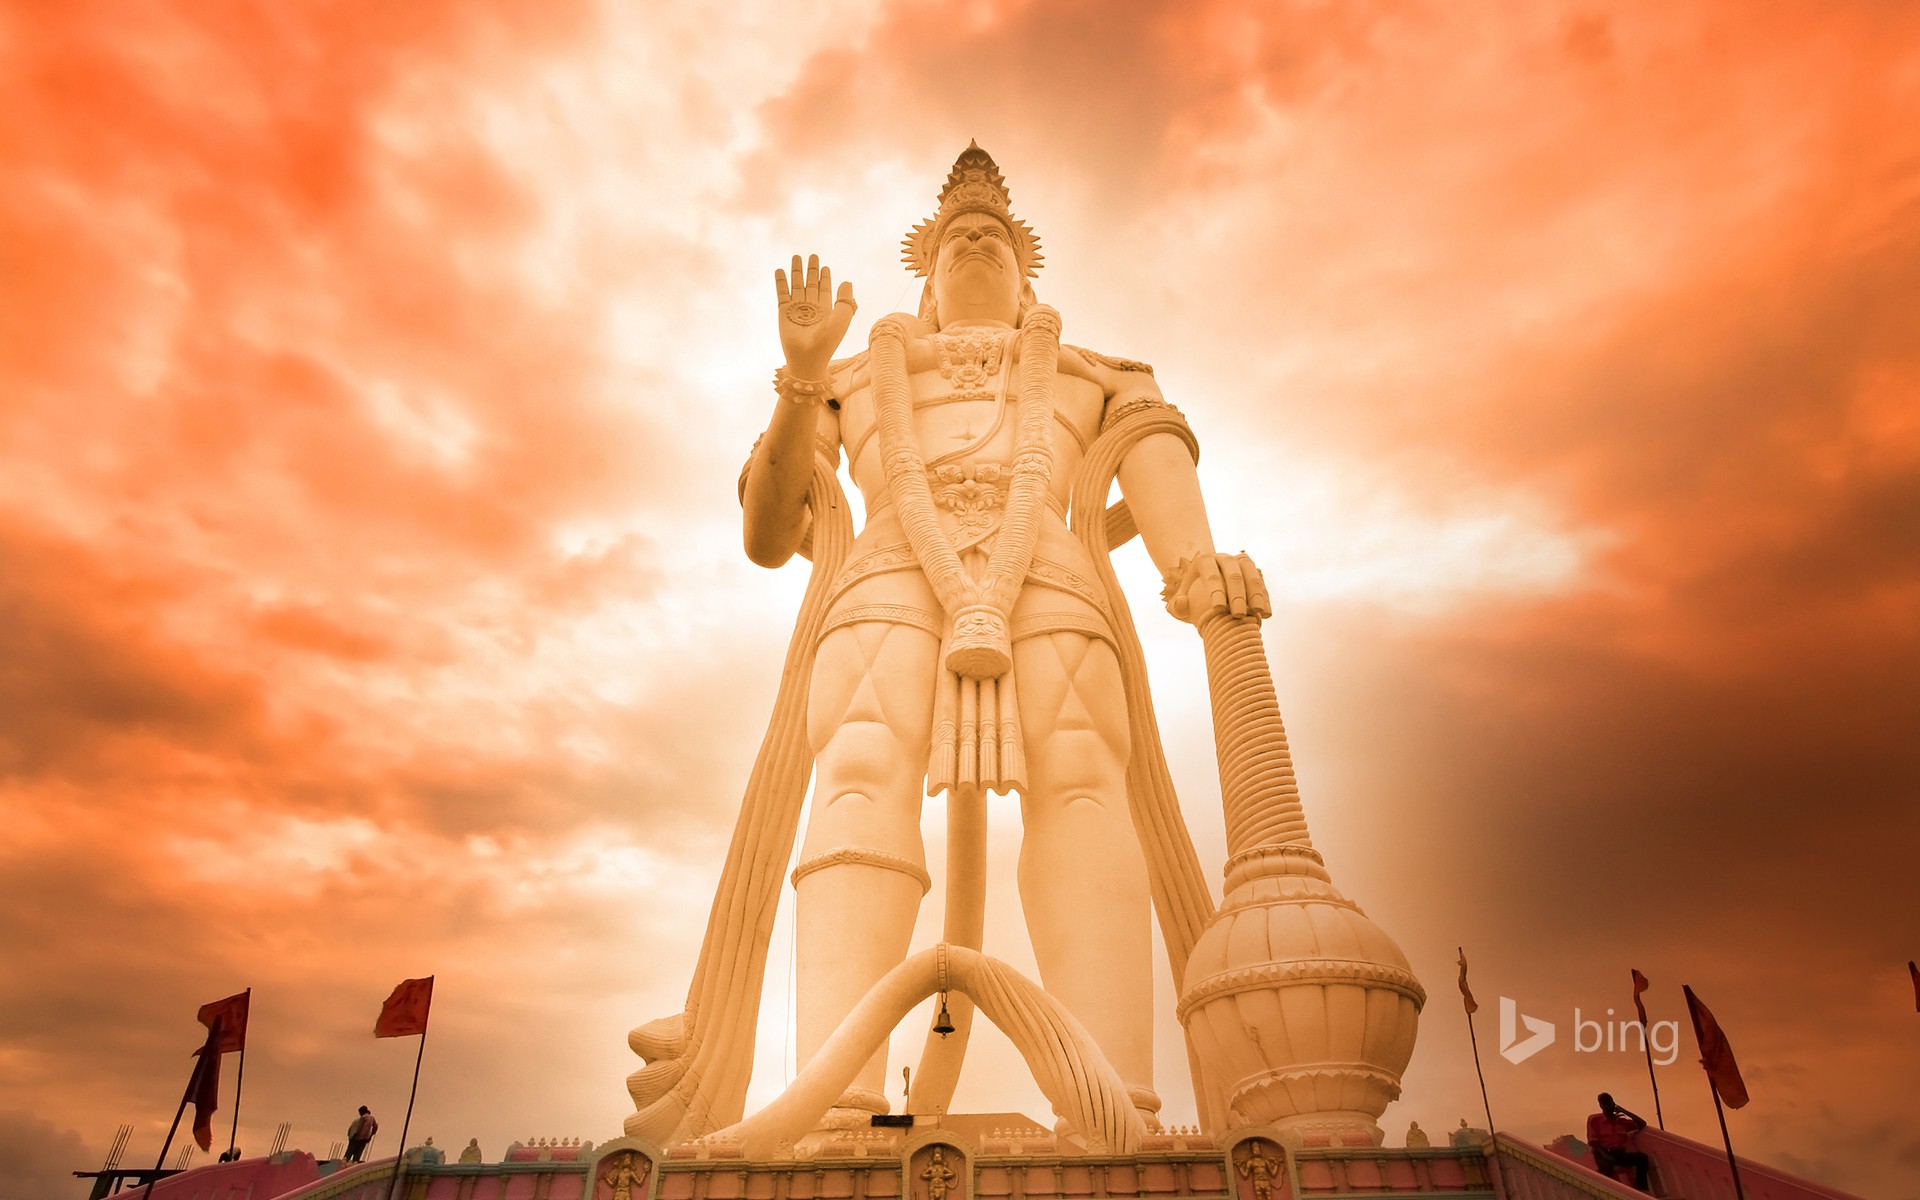 Statue Sky Clouds Orange Bing Frontal View Low Angle 1920x1200